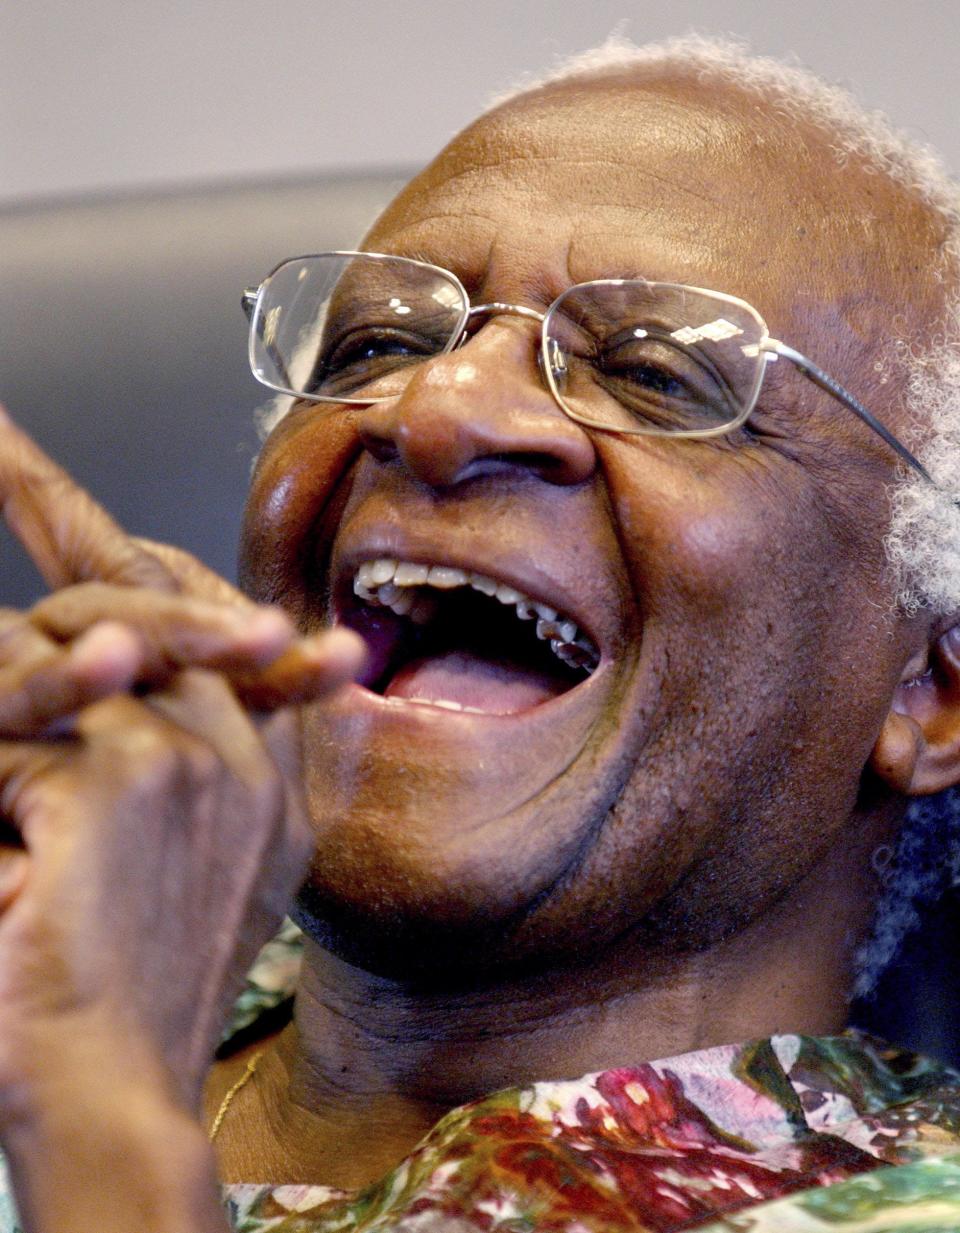 The late Archbishop Desmond Tutu laughs after answering a question about local reaction to his speech at a peace rally in Jacksonville in 2003. Tutu spent a semester as a visiting scholar at the University of North Florida.